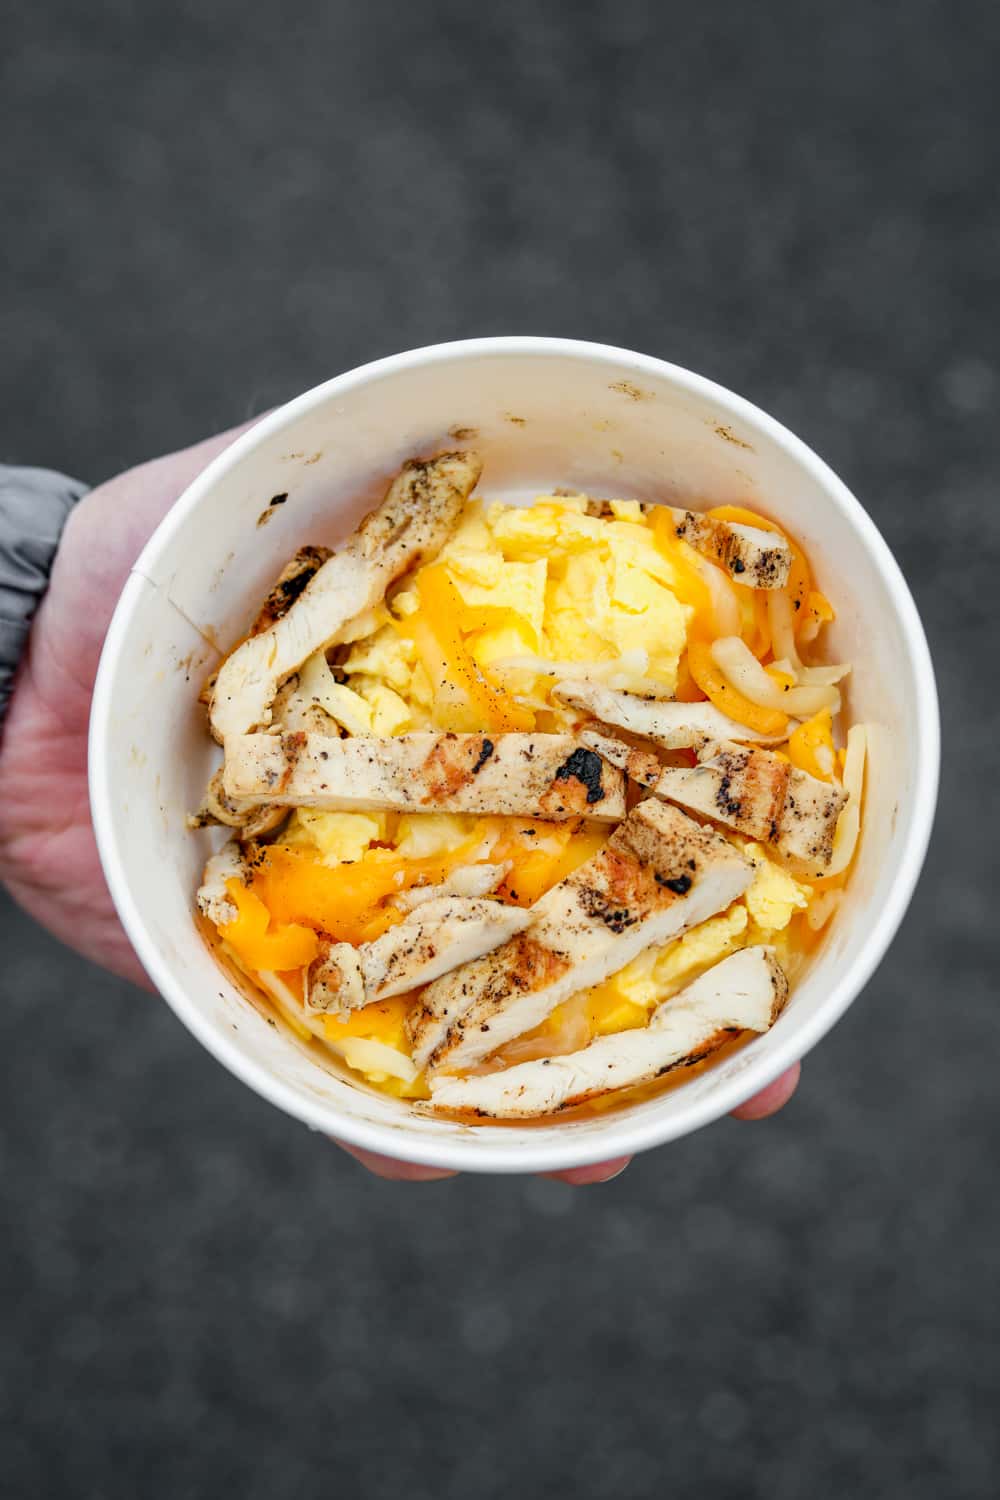 A hand holding a bowl filled with scrambled eggs Monterey and cheddar cheese and grilled chicken strips.